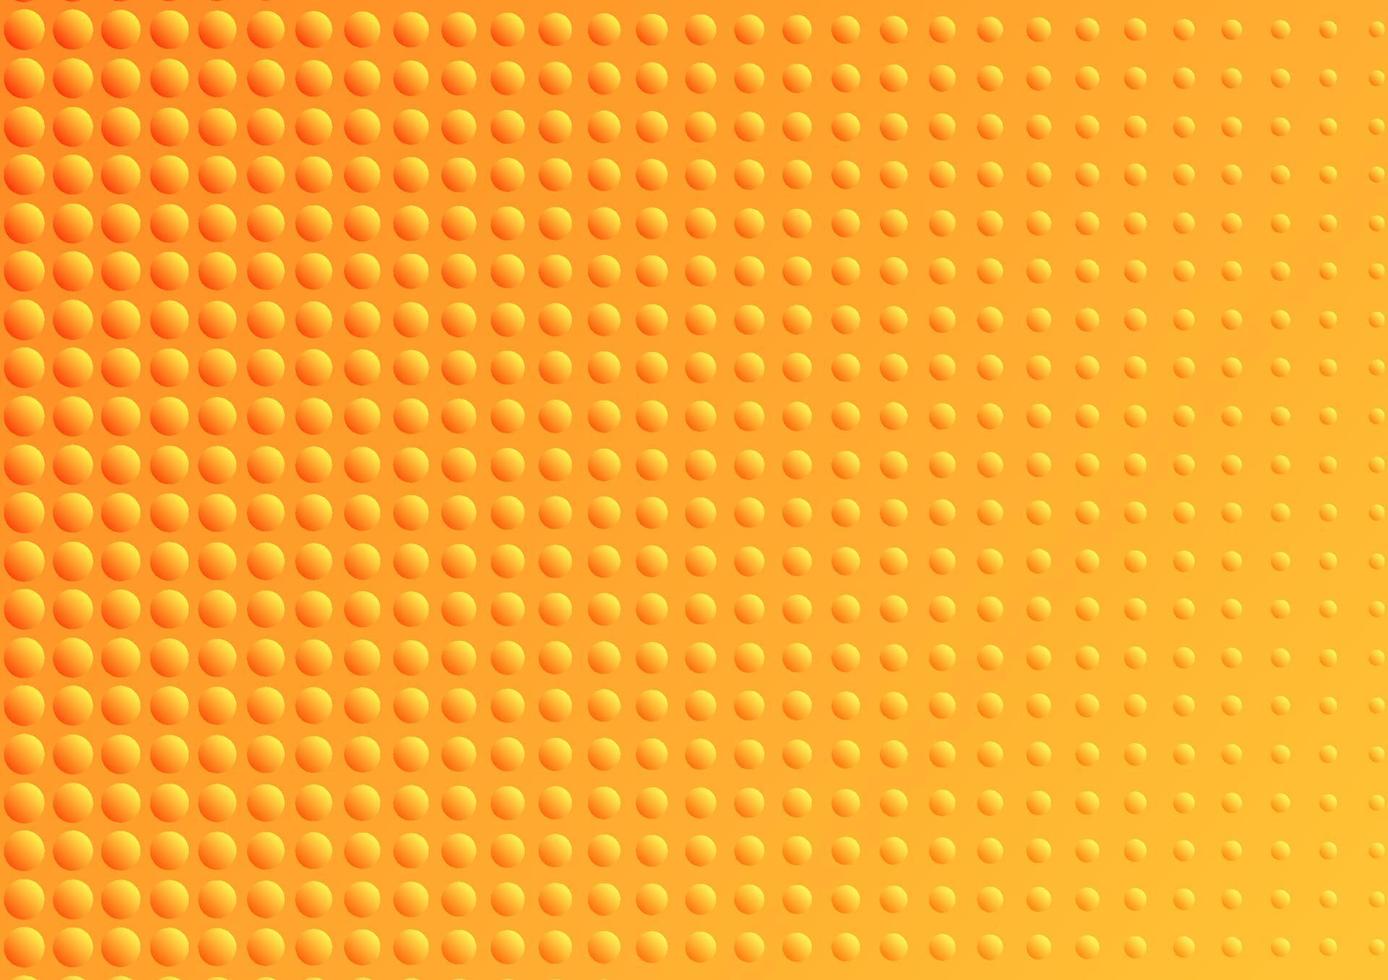 Abstract halftone dots pattern  background in yellow colors vector